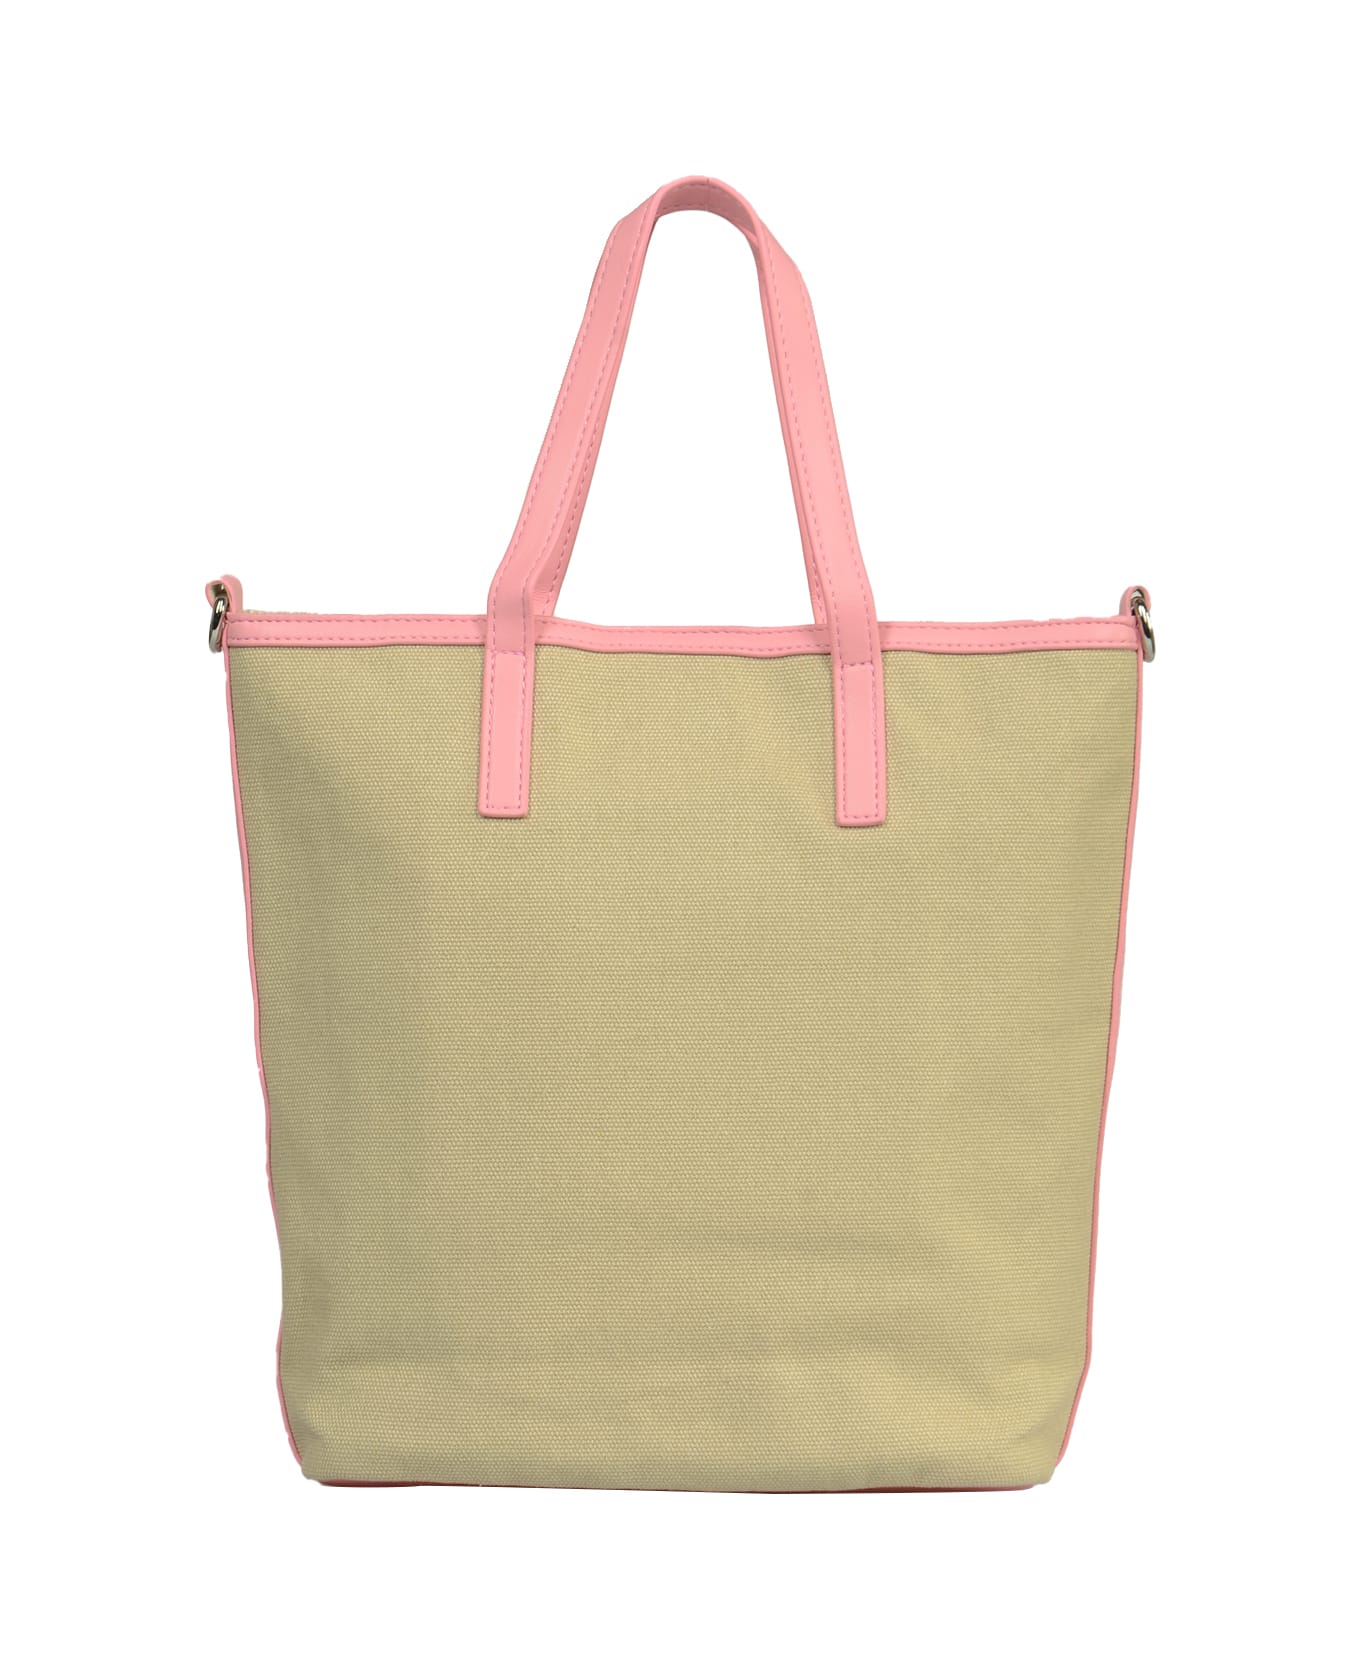 MSGM Logo Small Shopping Tote - Pink/Yellow